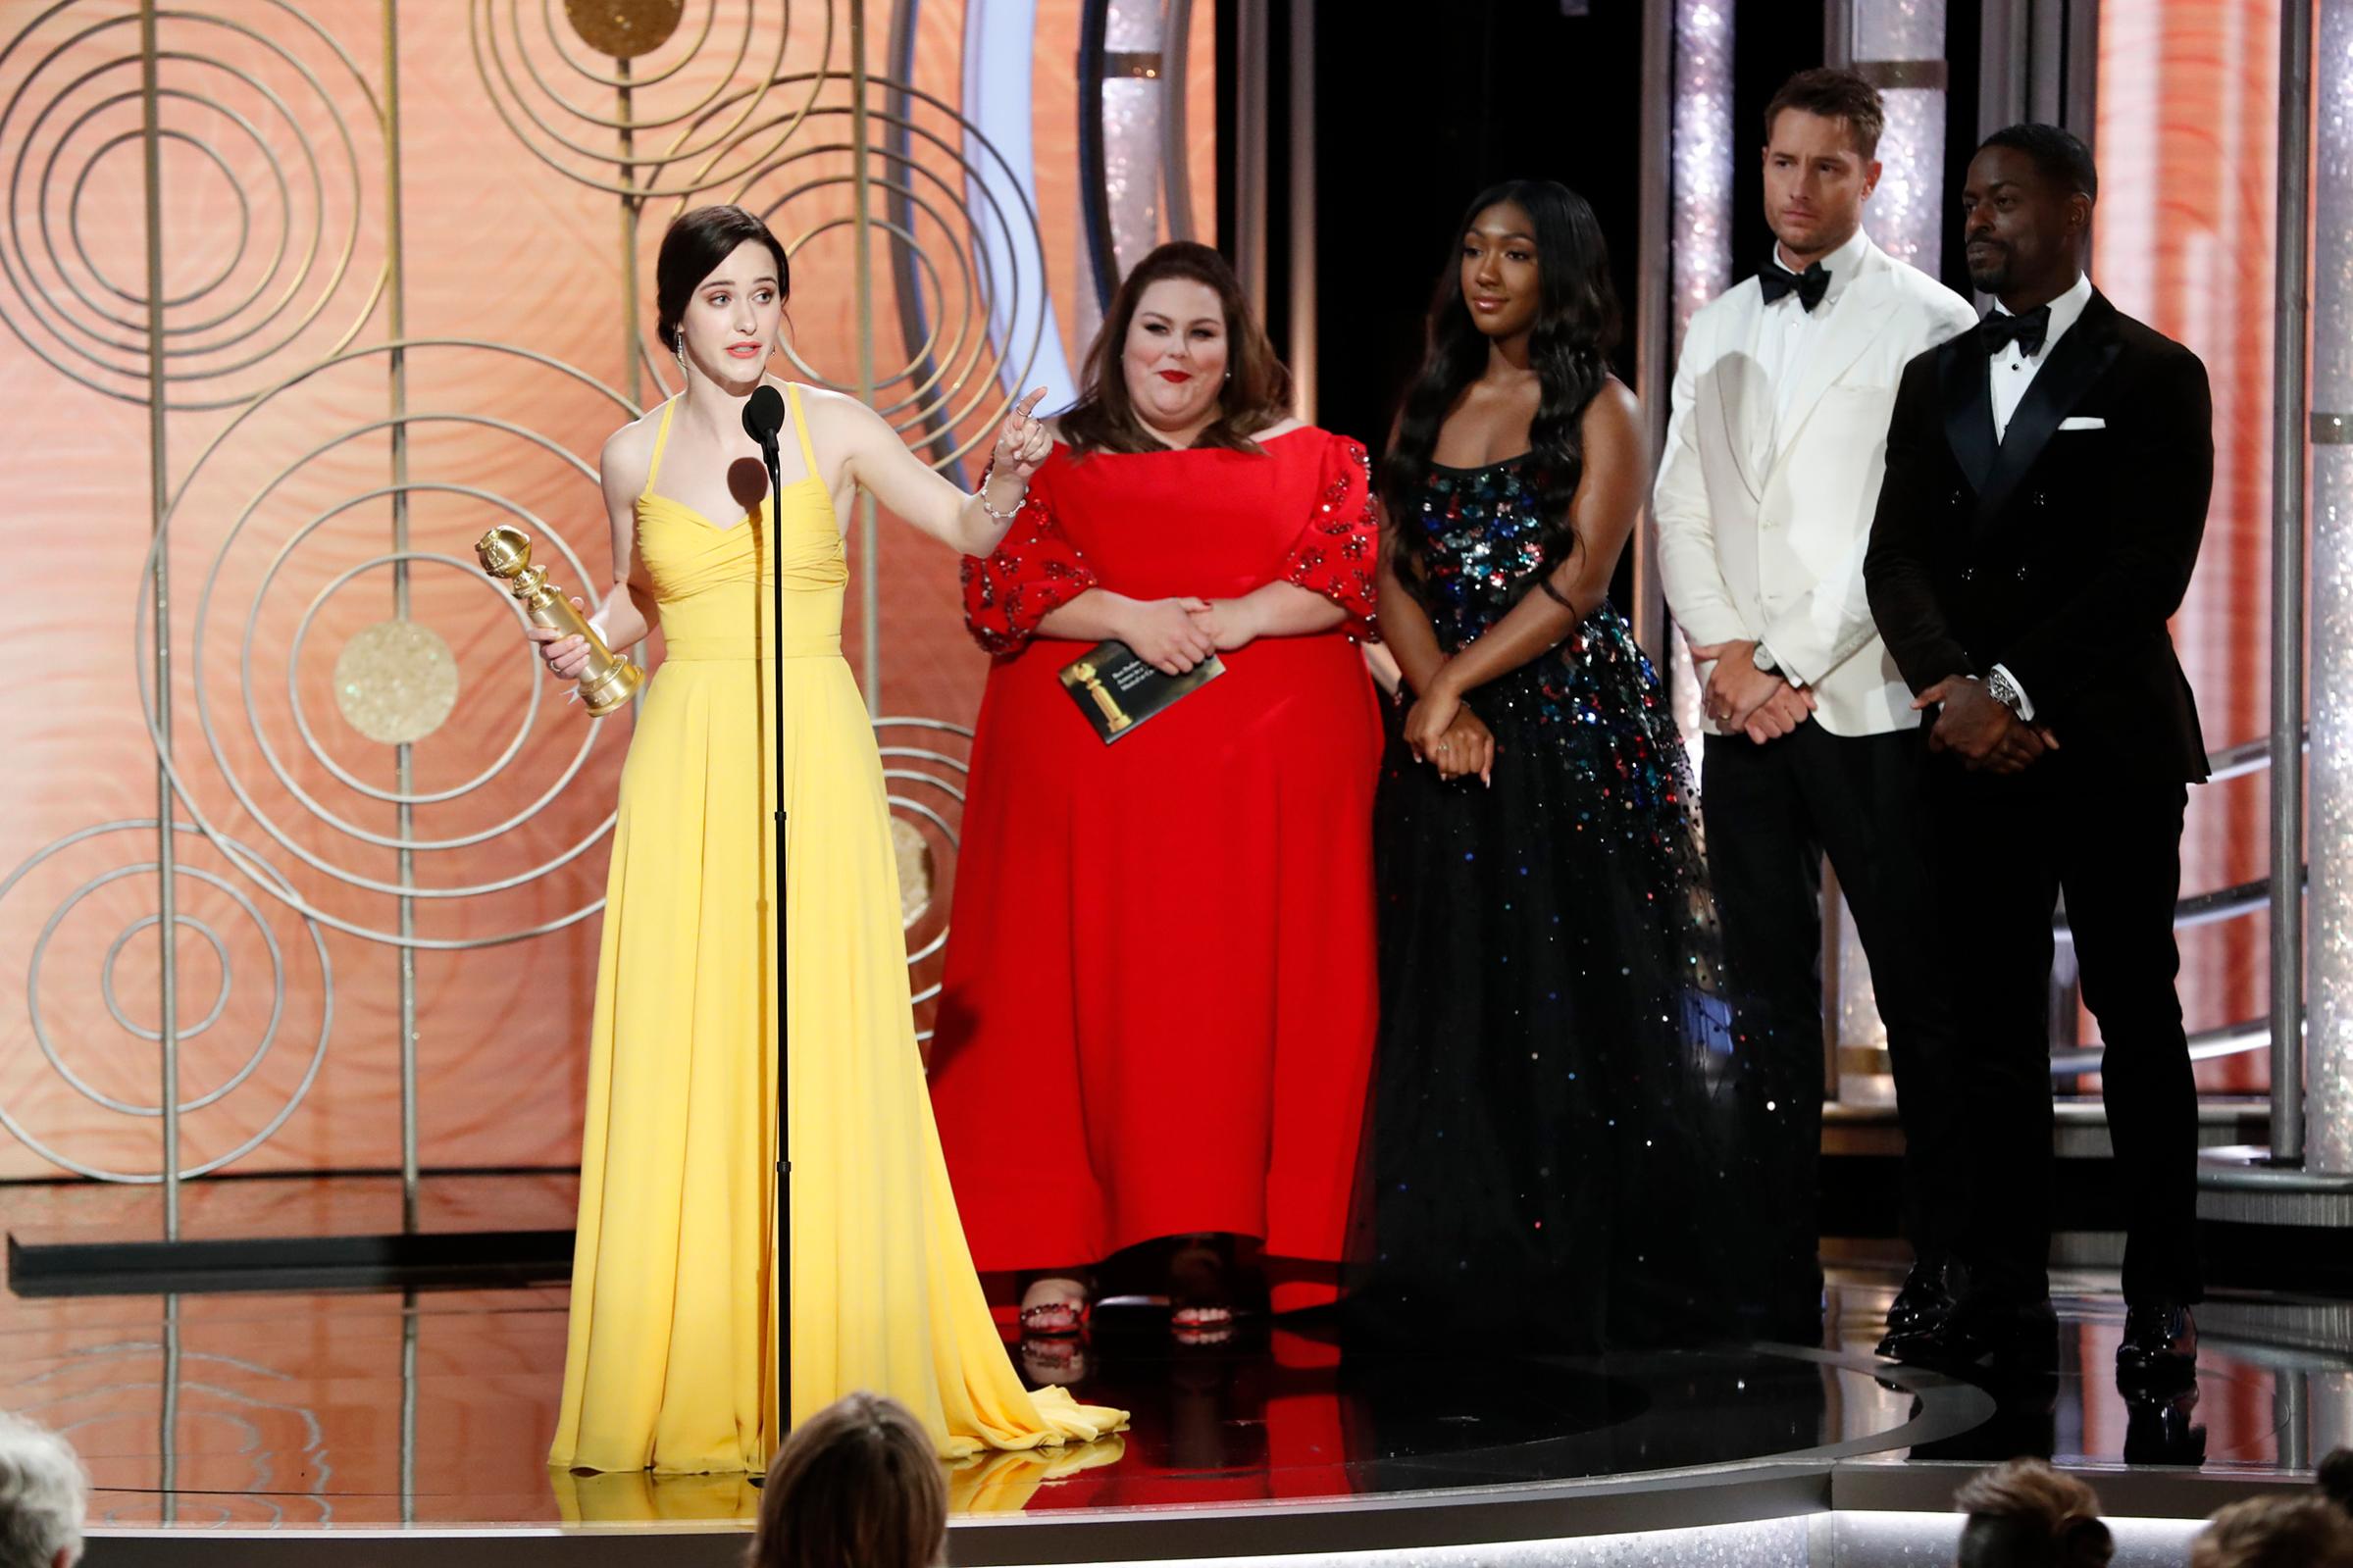 Rachel Brosnahan from “The Marvelous Mrs. Maisel” accepts the Best Performance by an Actress in a Television Series – Musical or Comedy award onstage during the 76th Annual Golden Globe Awards.